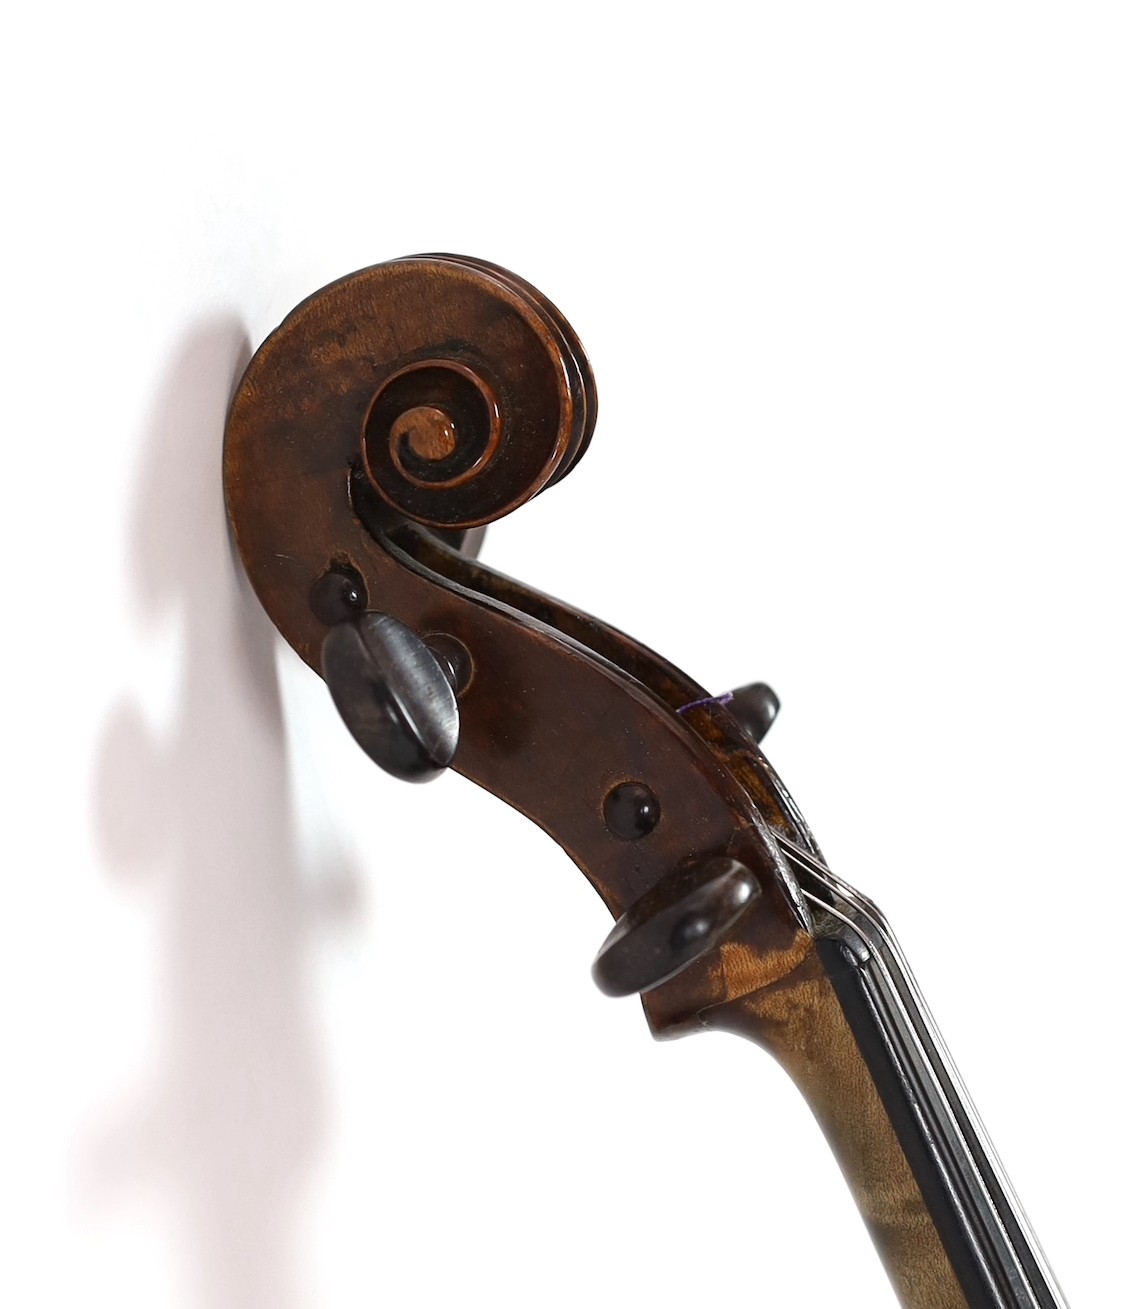 A 19th century violin attributed to Klotz school, length of back 35.5 cm